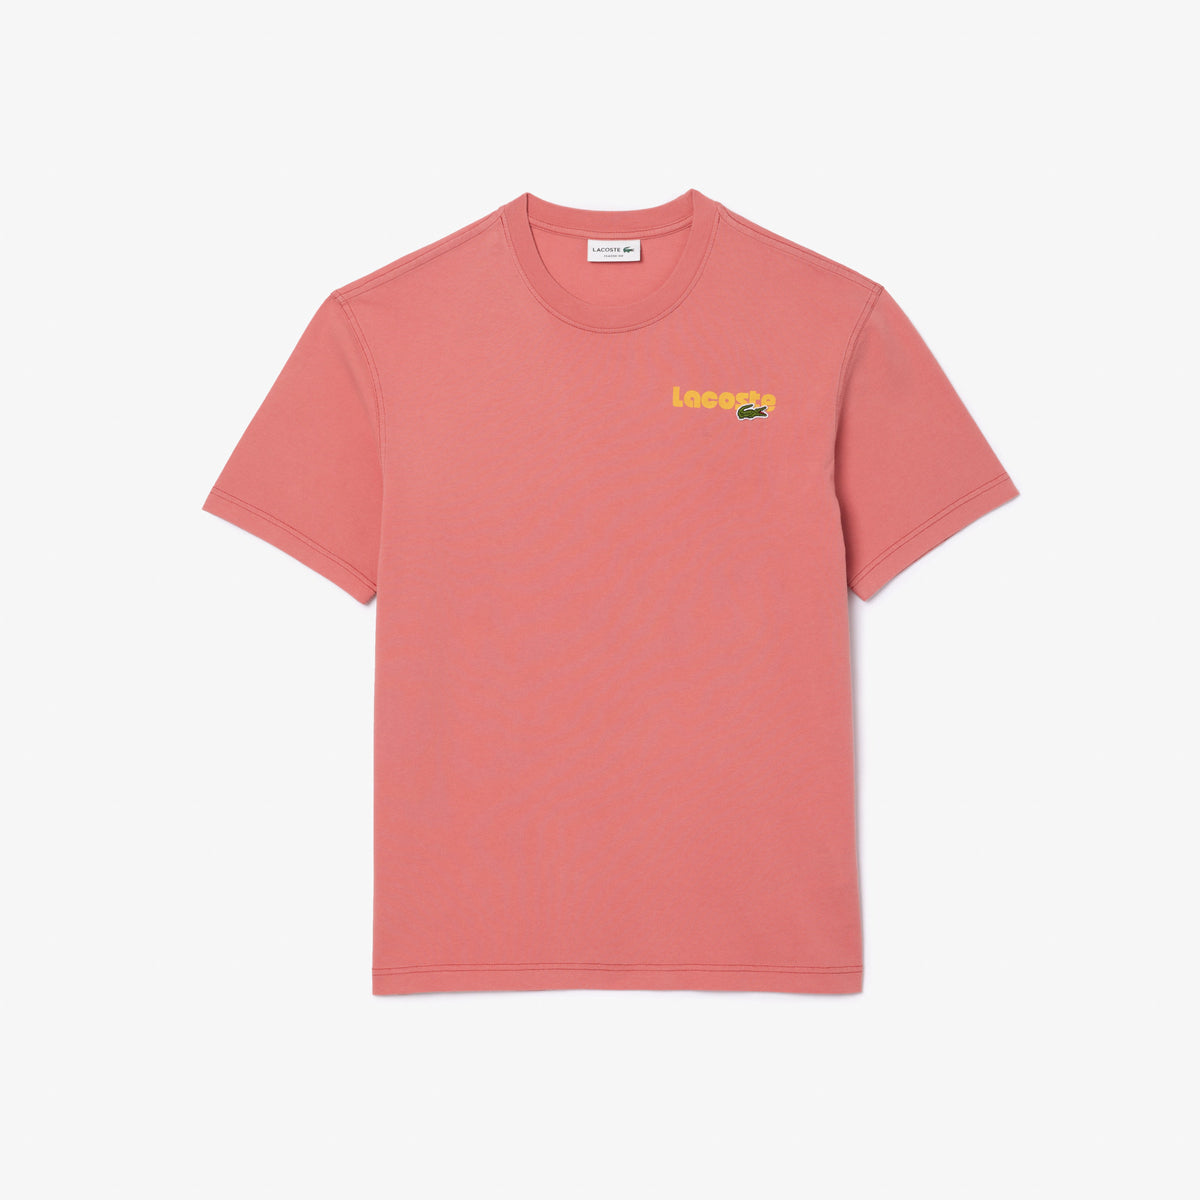 Washed Effect T-Shirt - Pink